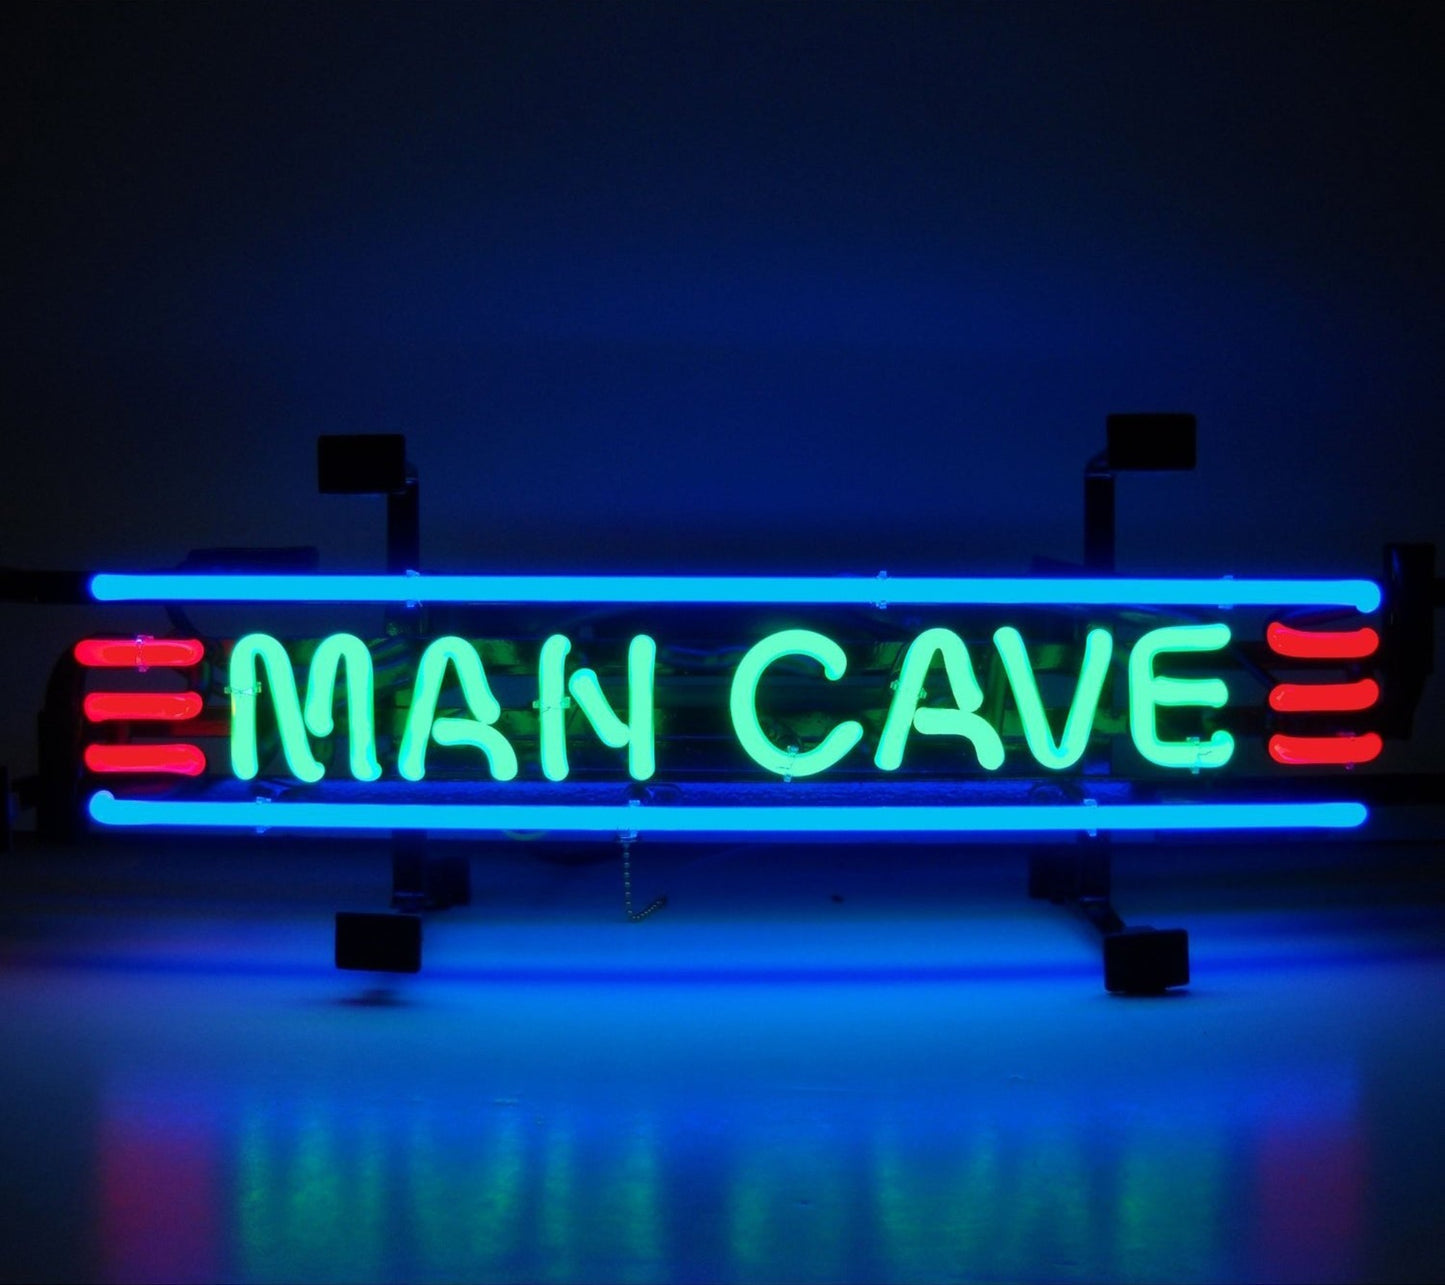 Man Cave Junior Neon Sign featuring multi-colored neon lights spelling out 'MAN CAVE', the ultimate addition to any personal retreat space